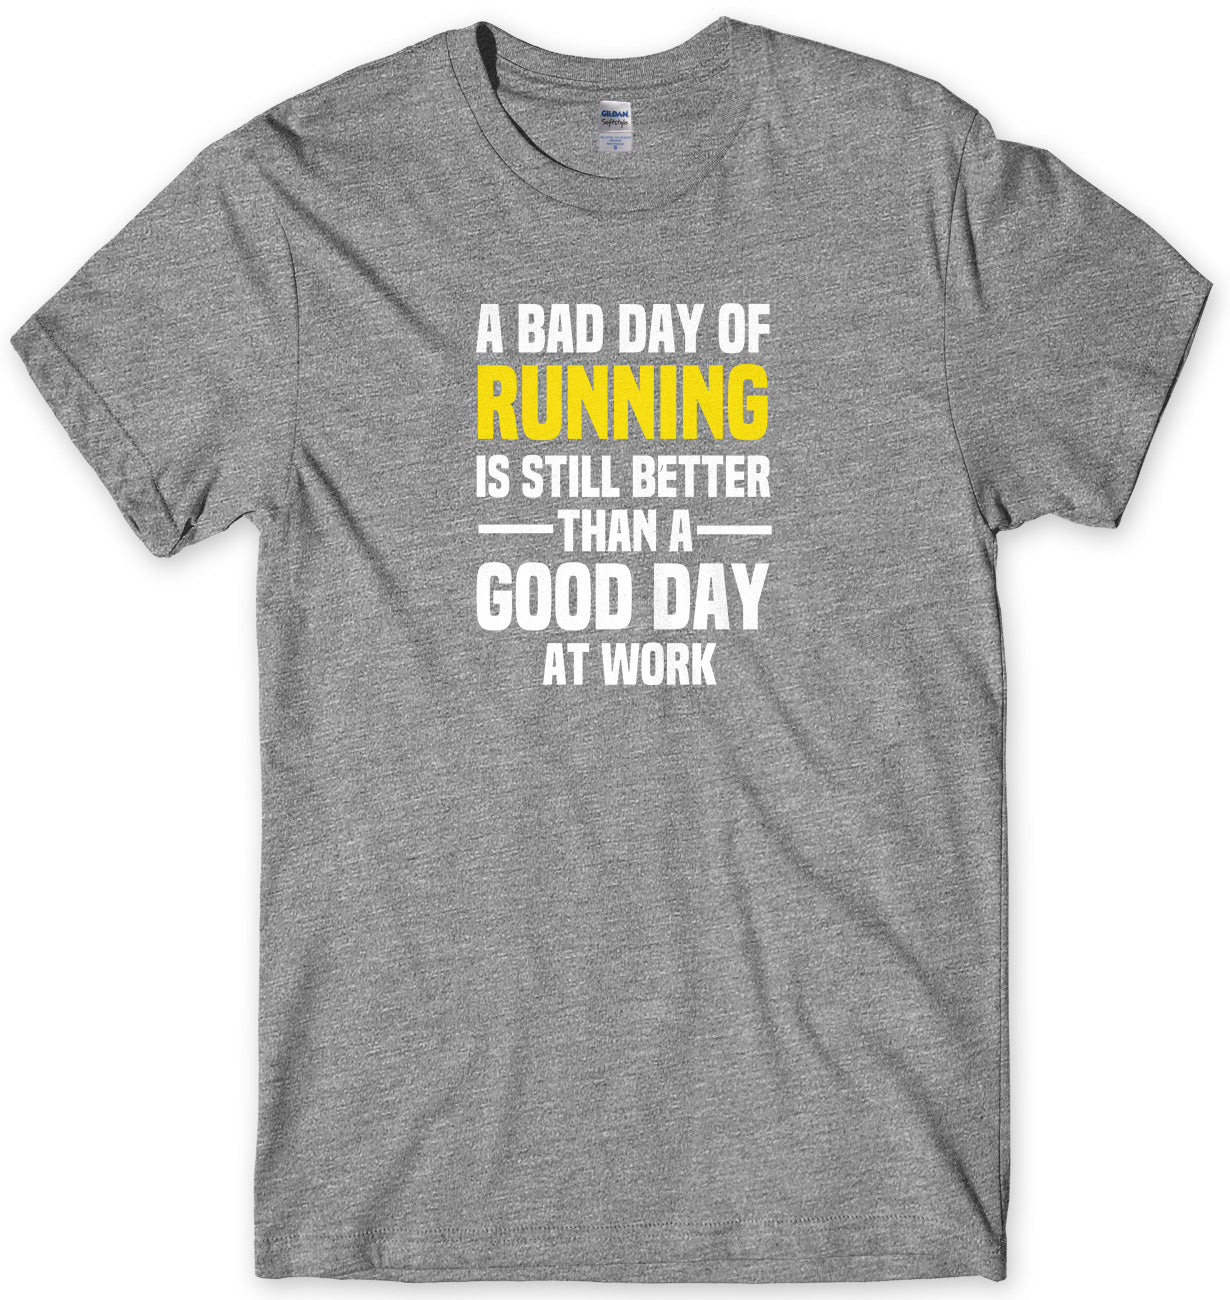 A BAD DAY OF RUNNING IS STILL BETTER THAN A GOOD DAY AT WORK MENS FUNNY SLOGAN UNISEX T-SHIRT - StreetSide Surgeons